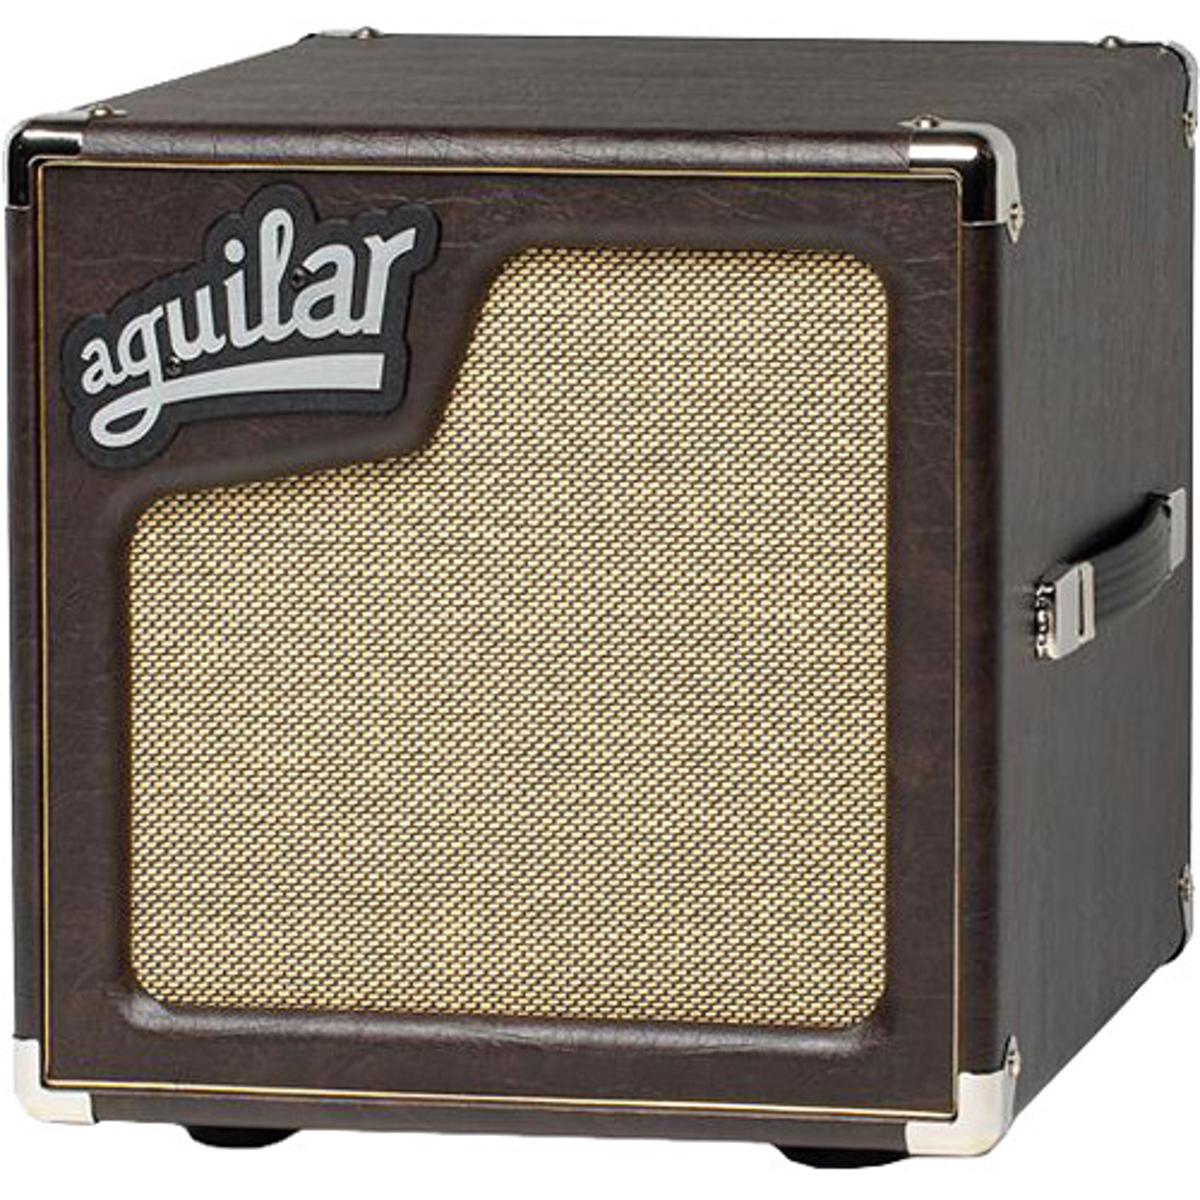 Aguilar SL 110 Bass Guitar Cabinet Super Light 1x10inch 8ohm Cab - Limited Edition Chocolate Brown